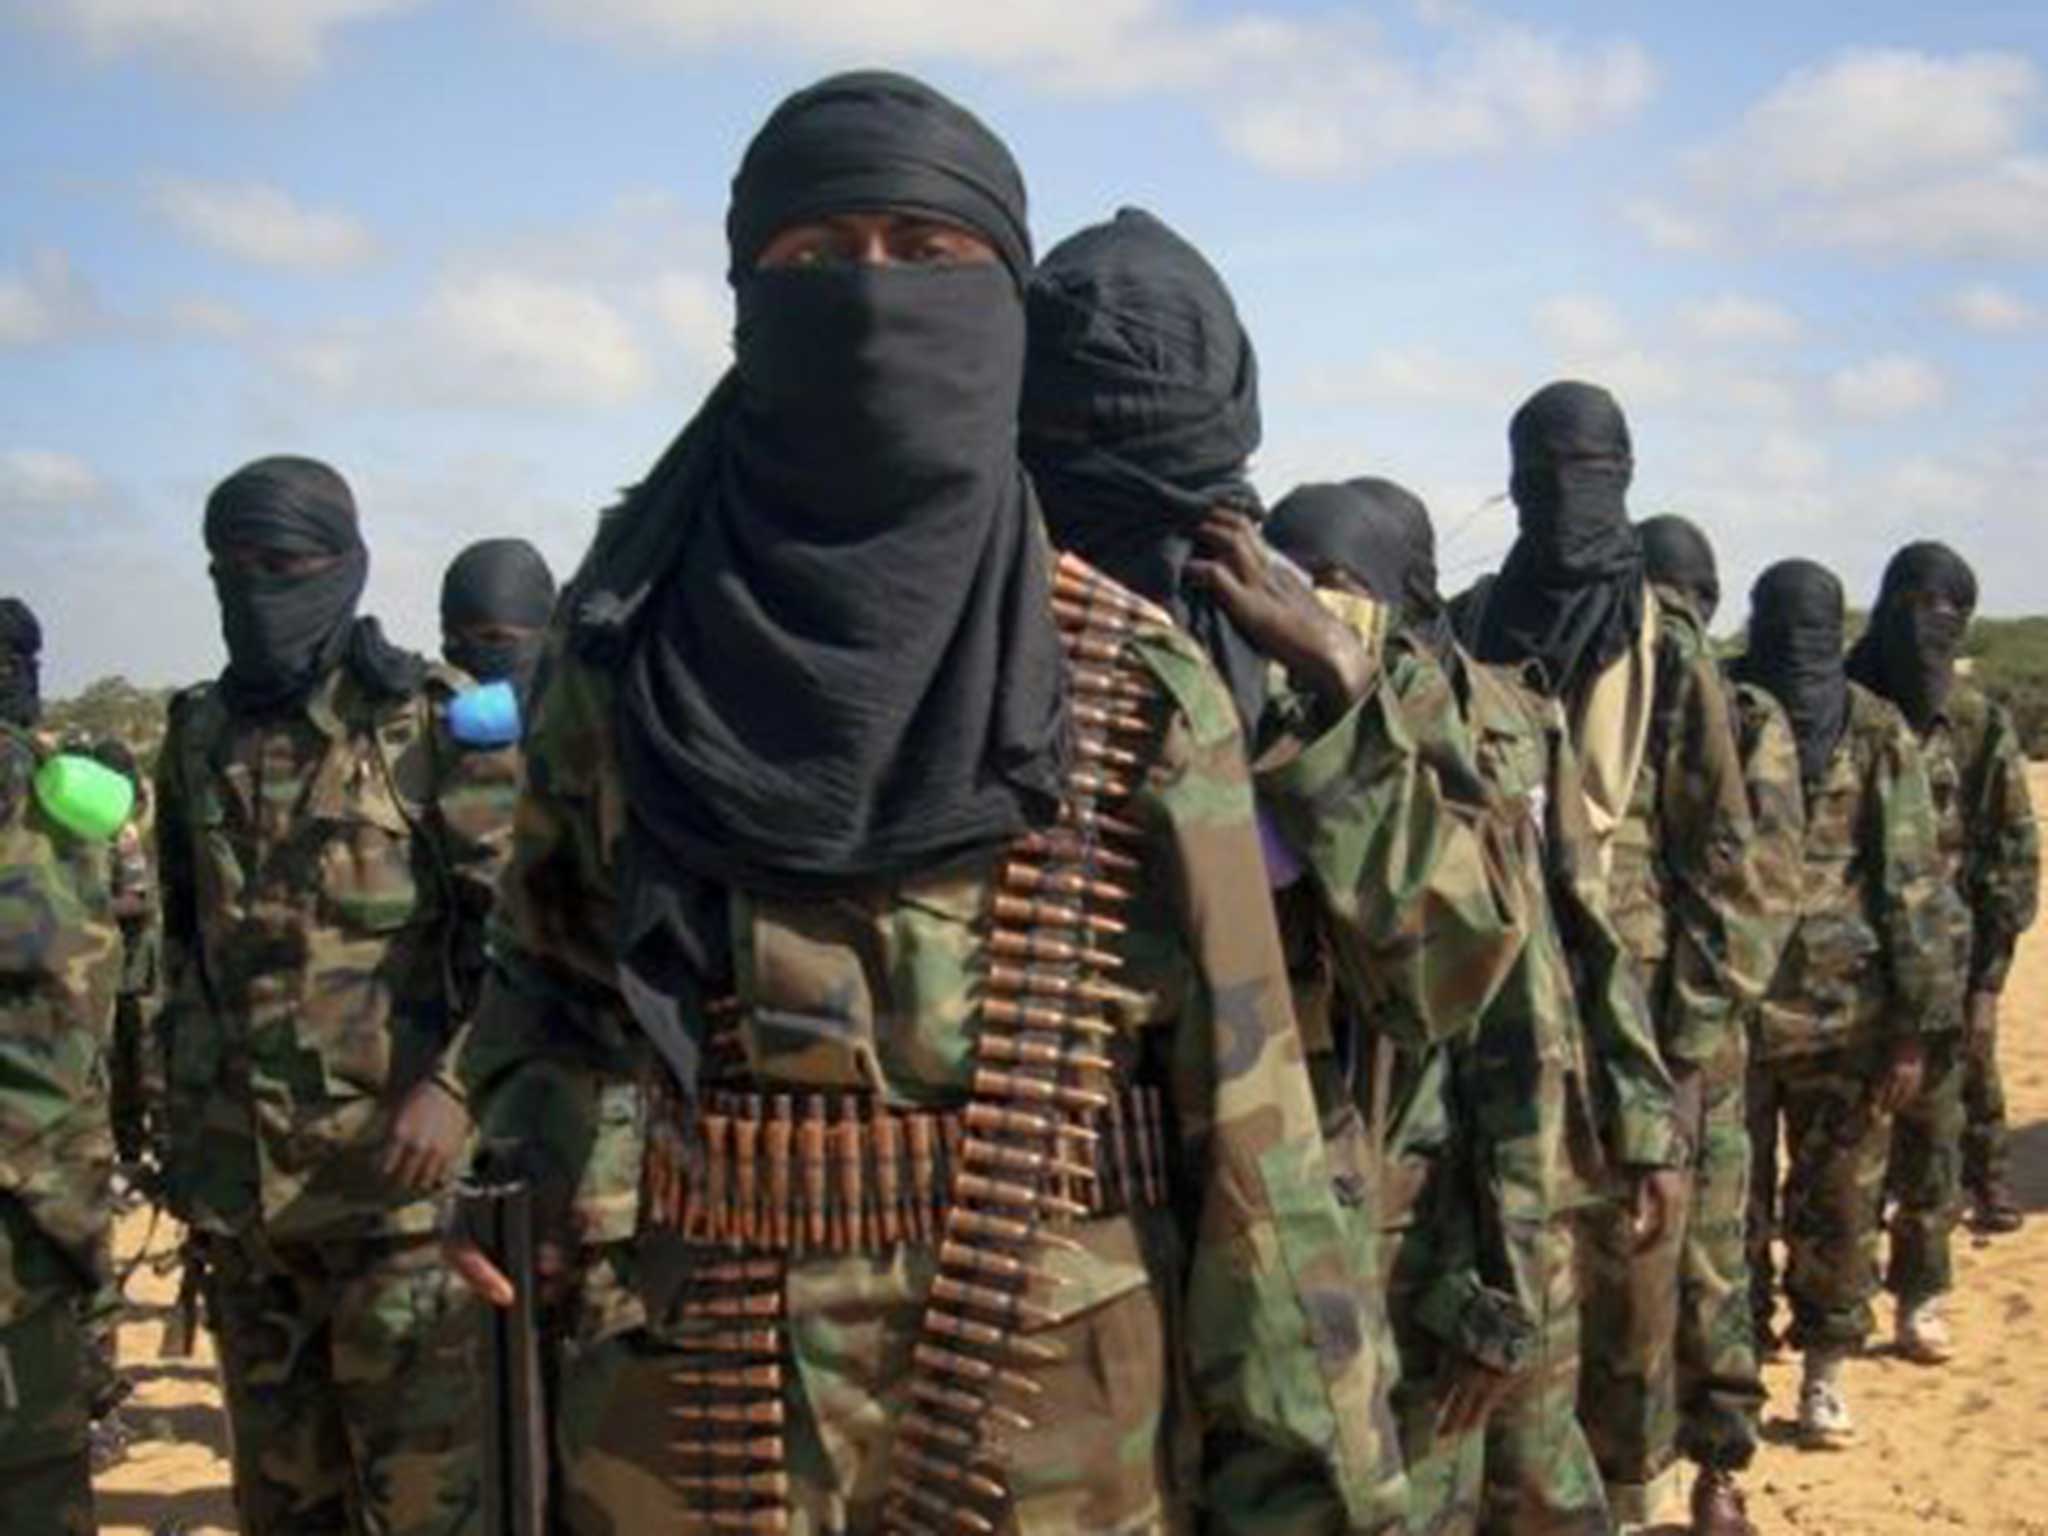 Armed members of the militant group al-Shabaab, which has claimed responsibility for the attack